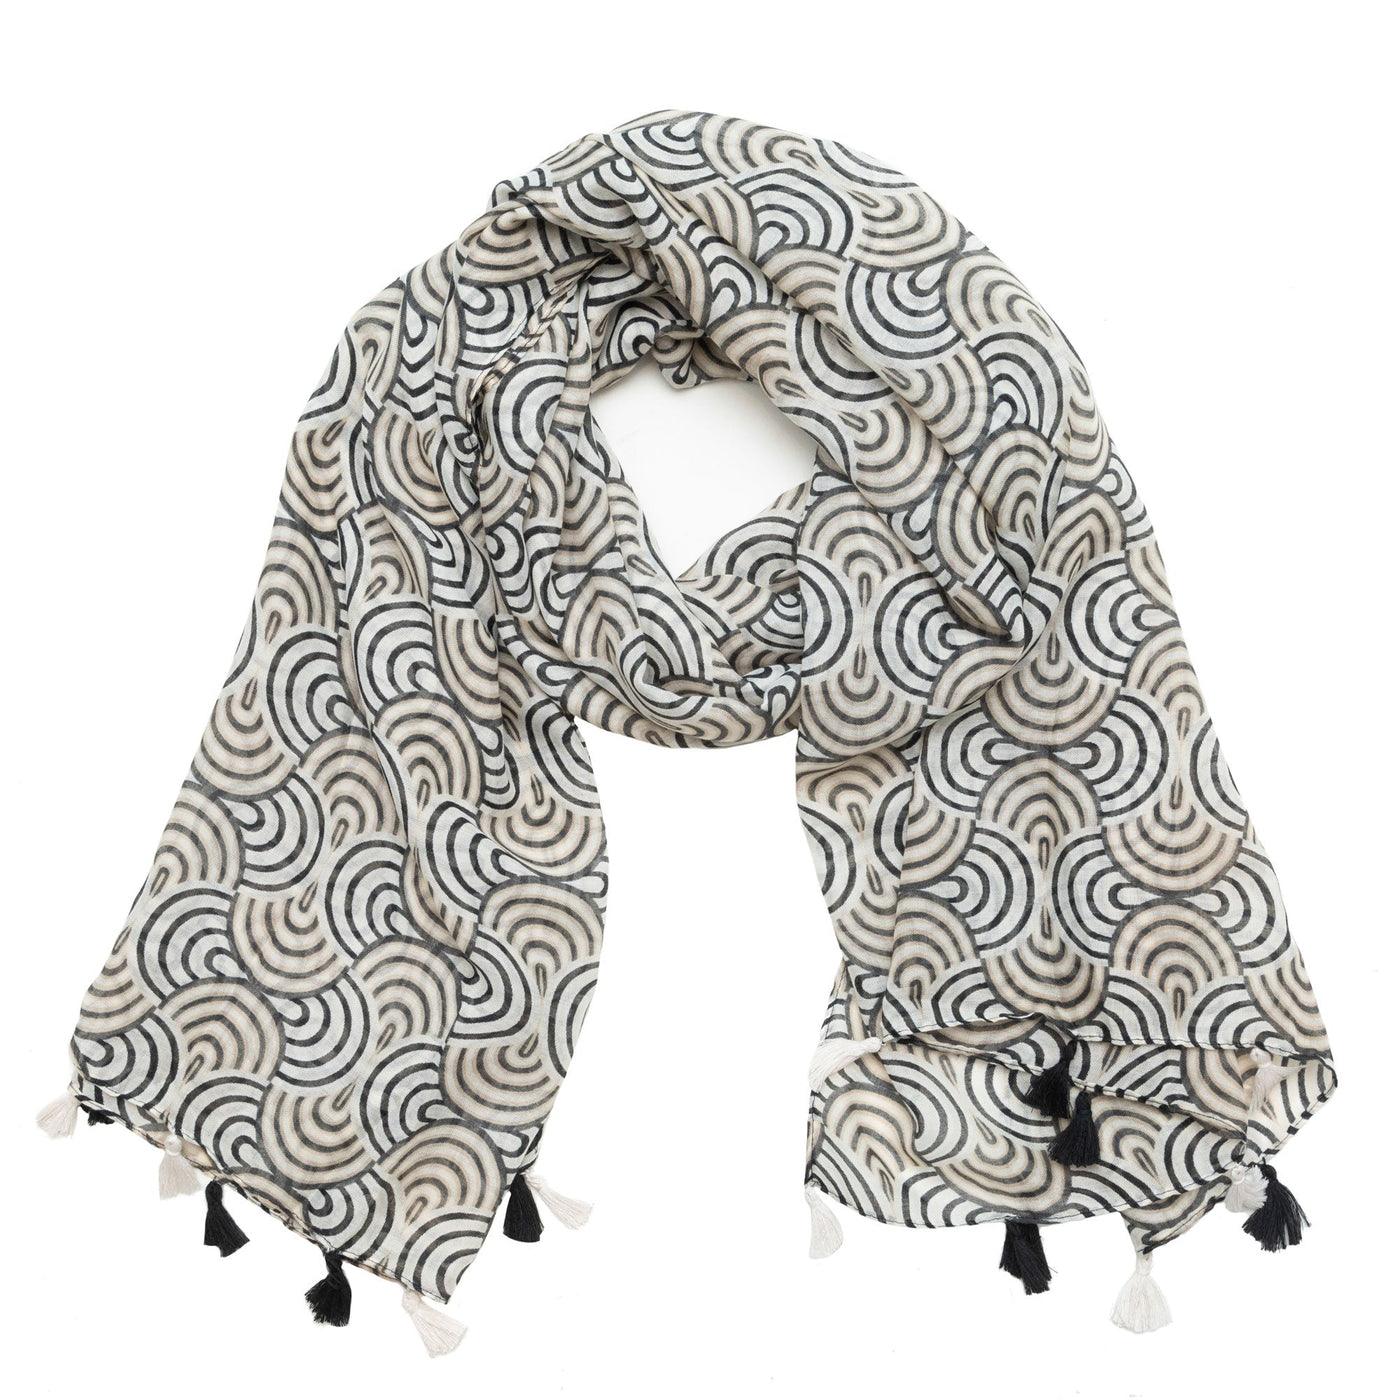 SCARF - Rain Or Shine - Light Weight Woven Black And White Rainbow Scarf